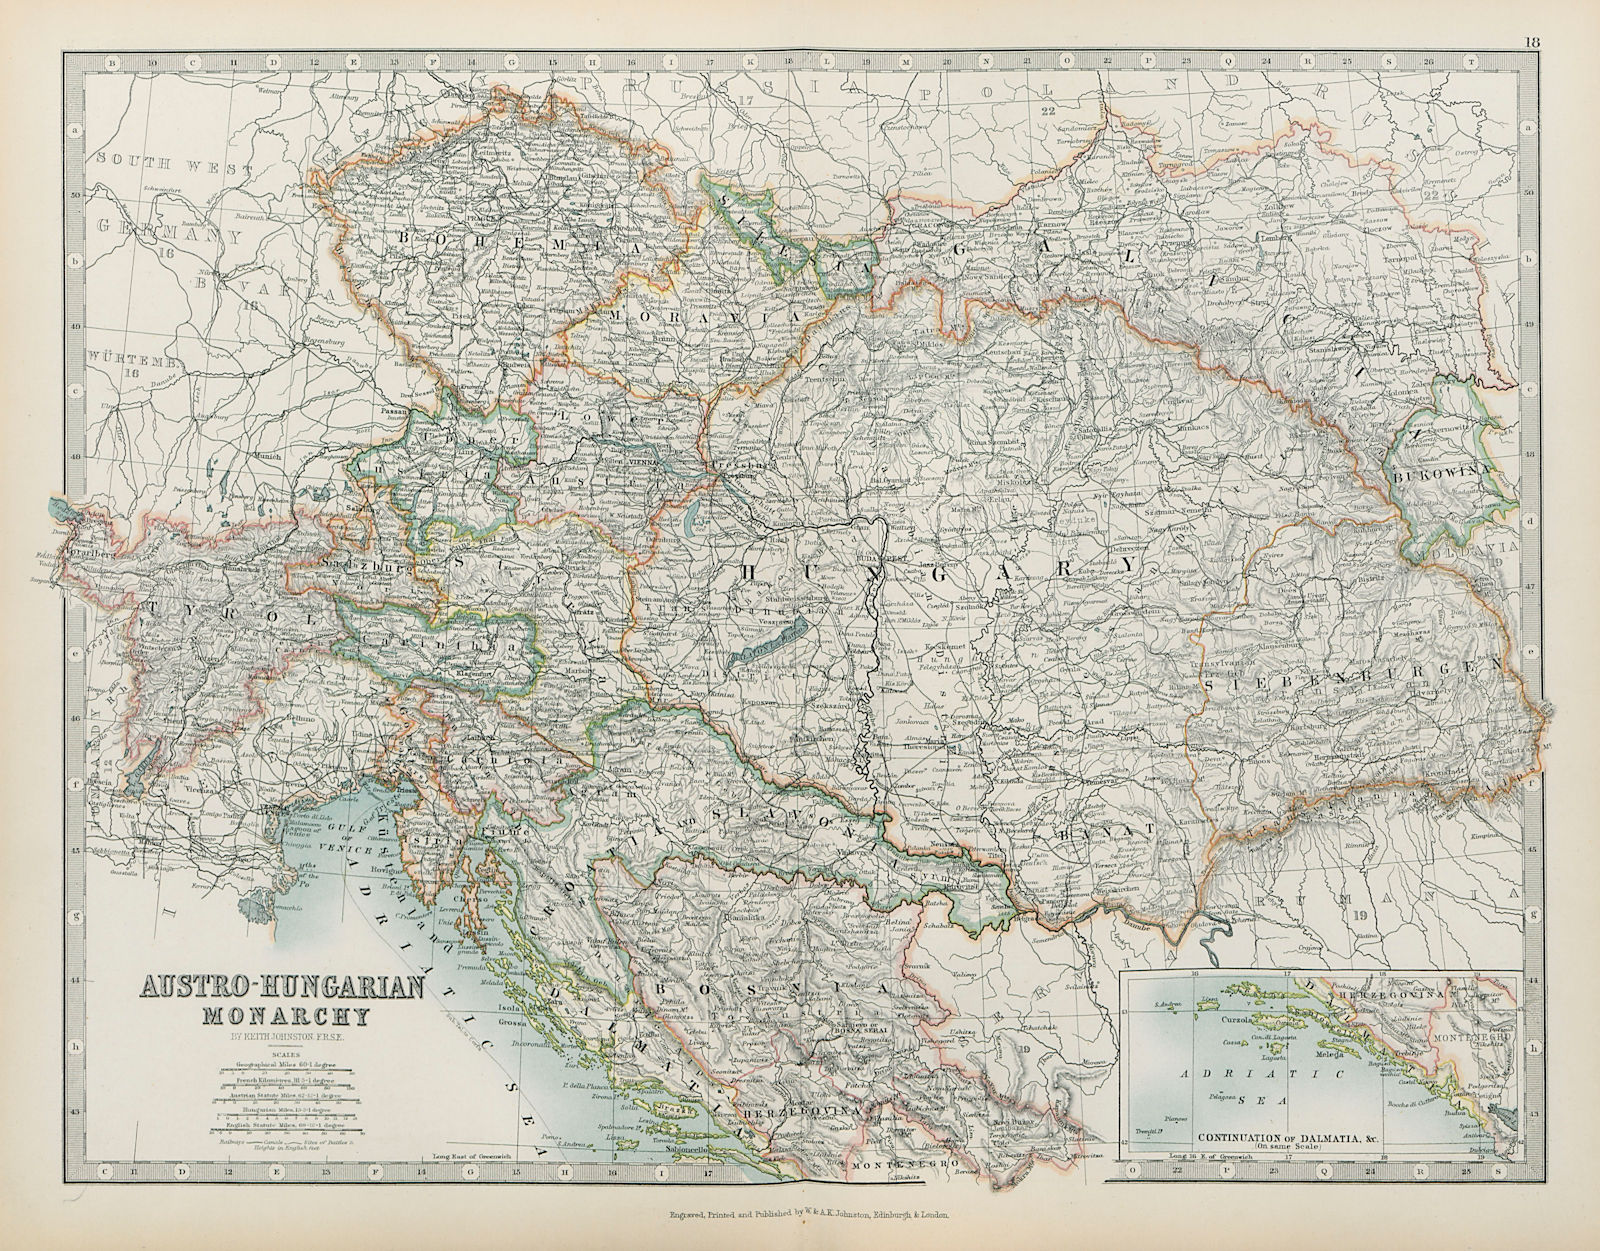 AUSTRO-HUNGARIAN MONARCHY Provinces Railways Canals JOHNSTON 1901 old map